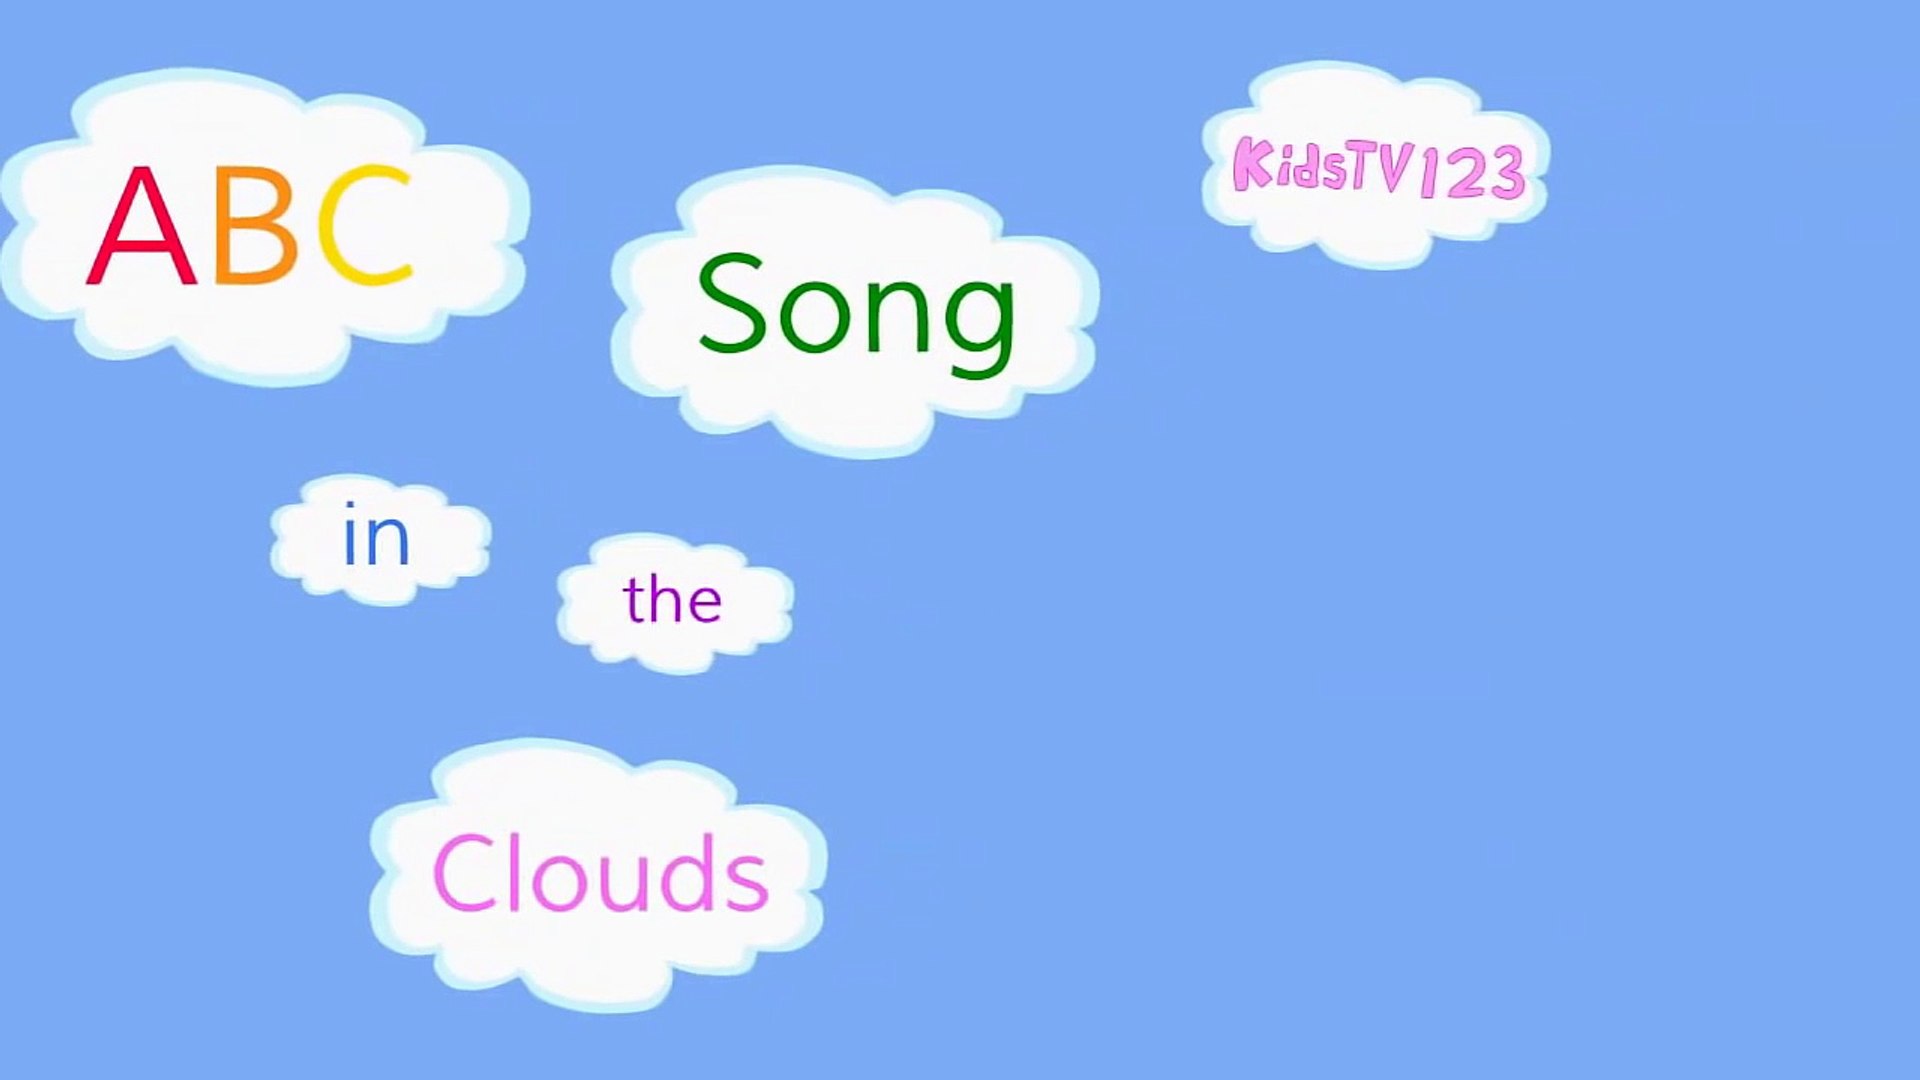 ABC Song in the Clouds (ZED version).